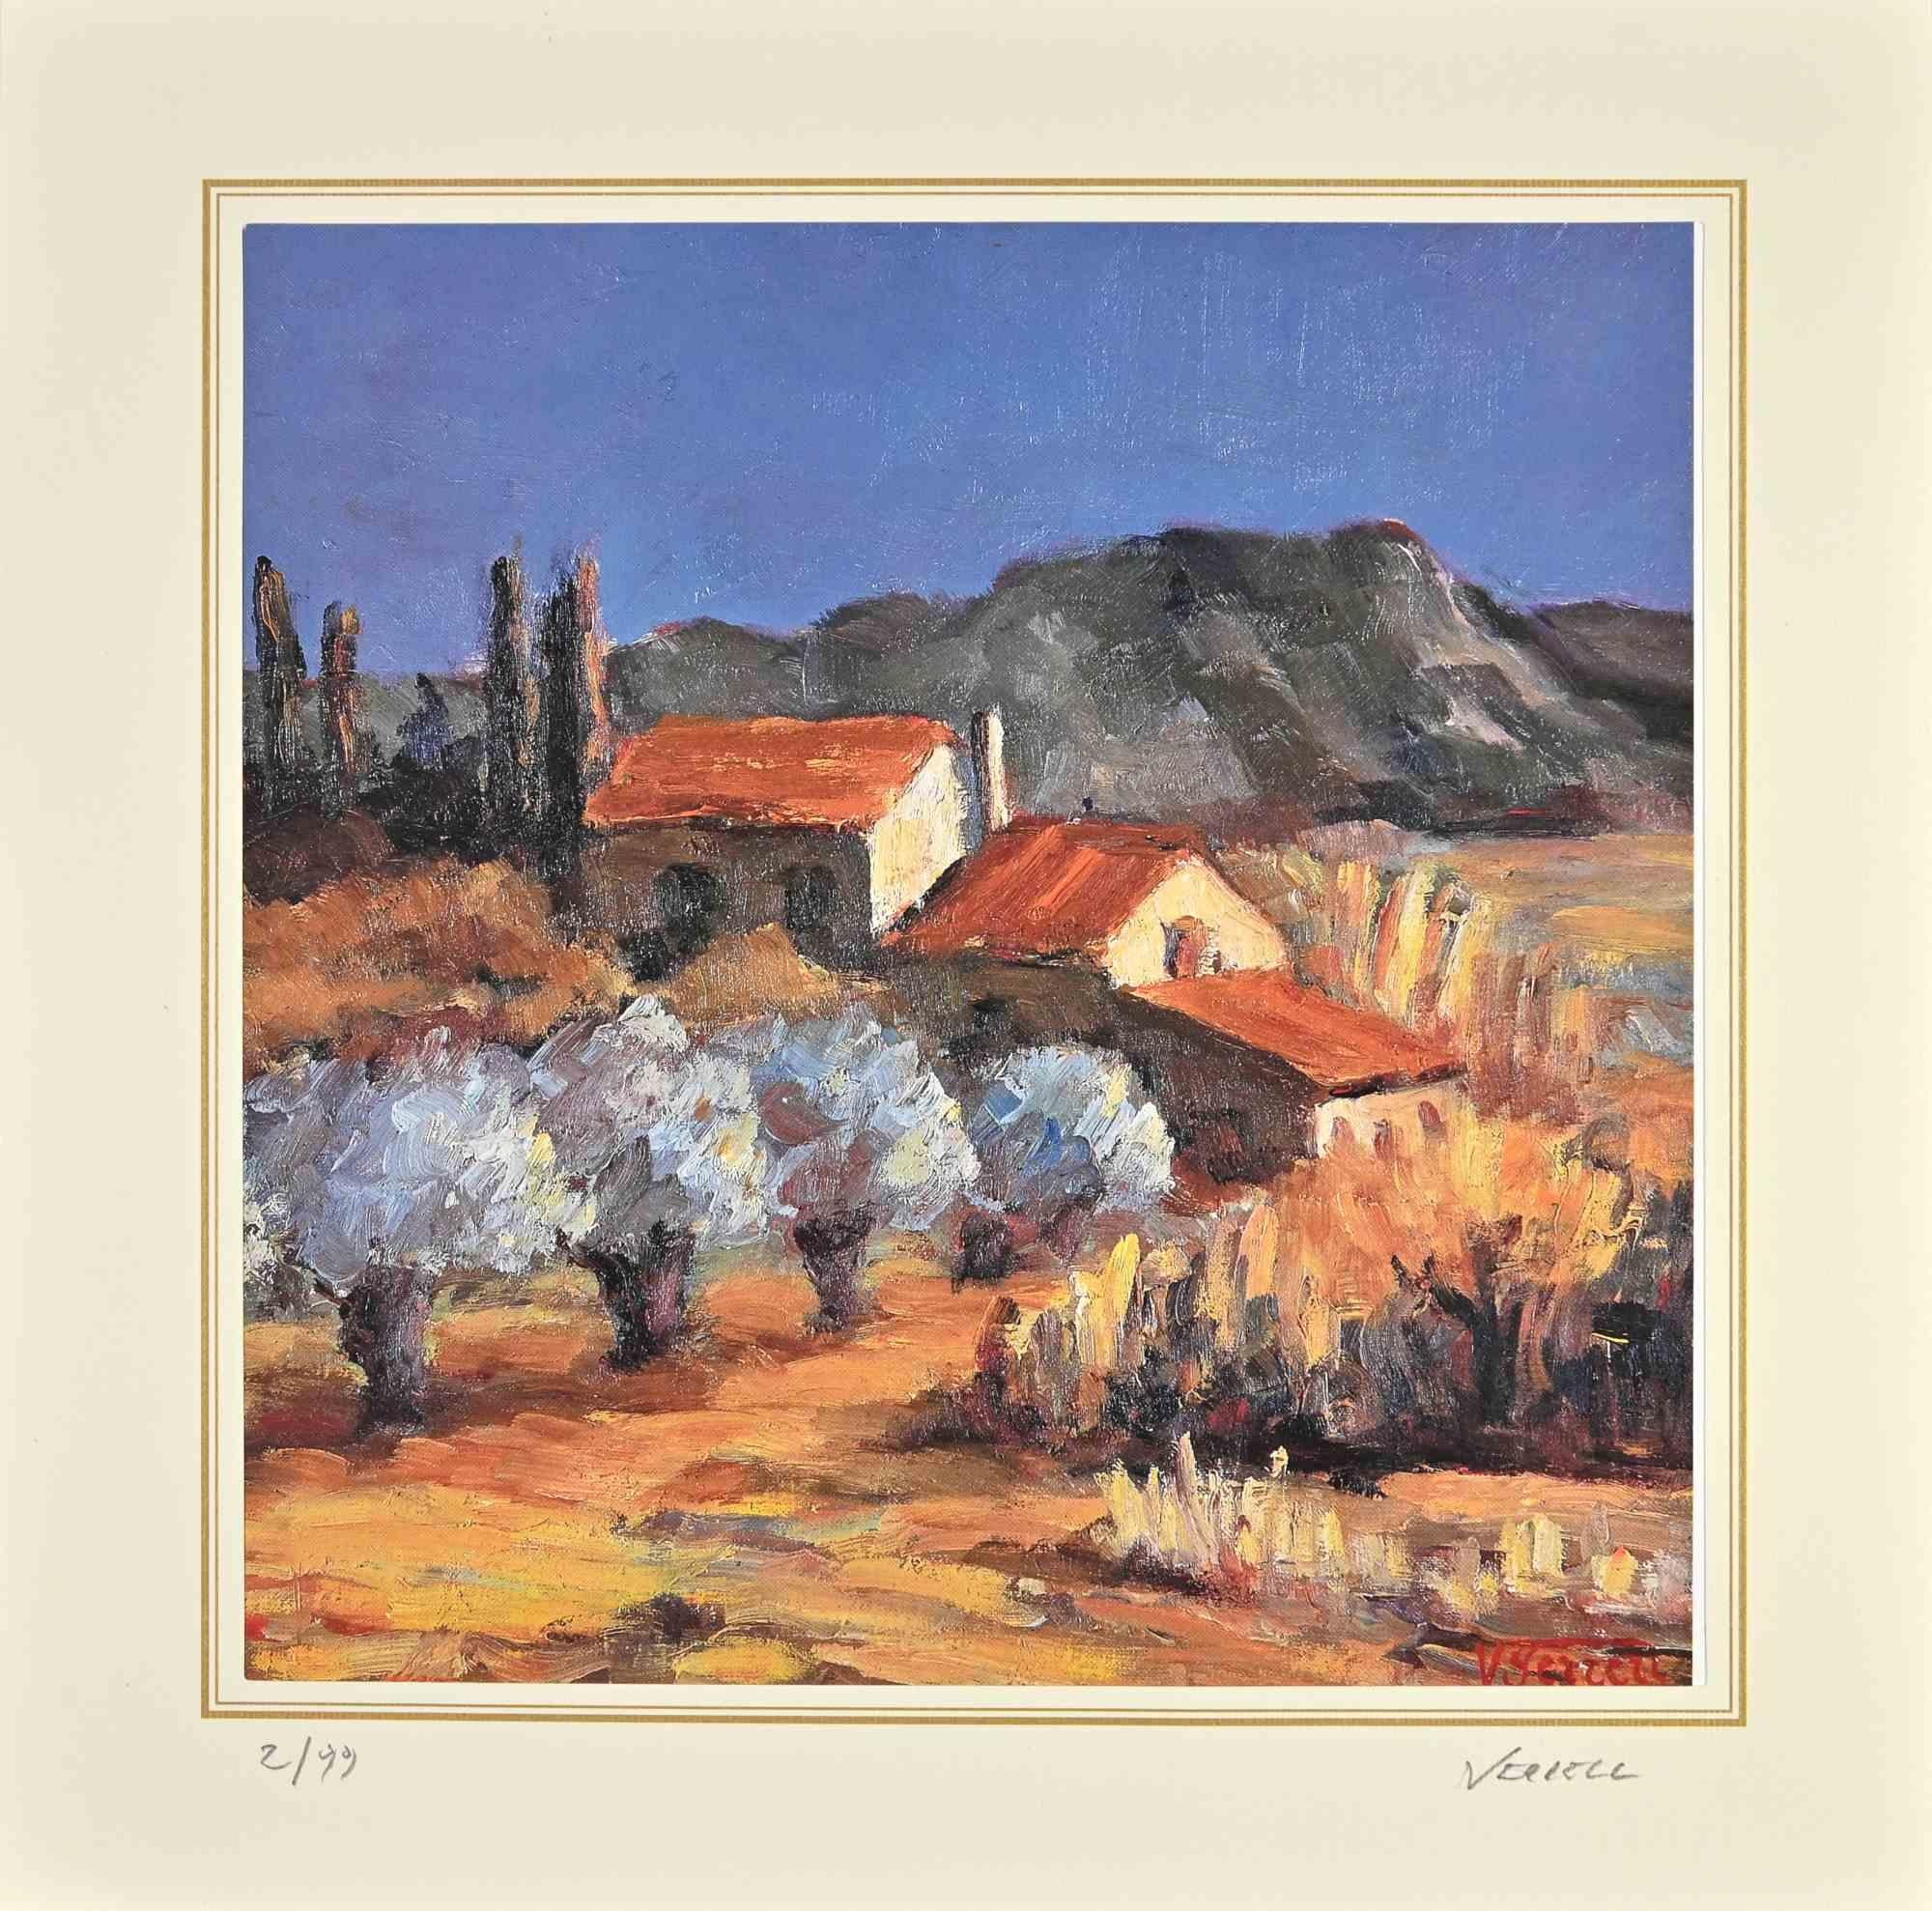 Landscape is a lithograph attributed to Nicholas Verrall (1945) in the Late 20th Century.

Hand-signed on the right corner. Numbered, Edition, 2/99, on the left margin. On the back is the label of the certificate of  authenticity.

The artwork is